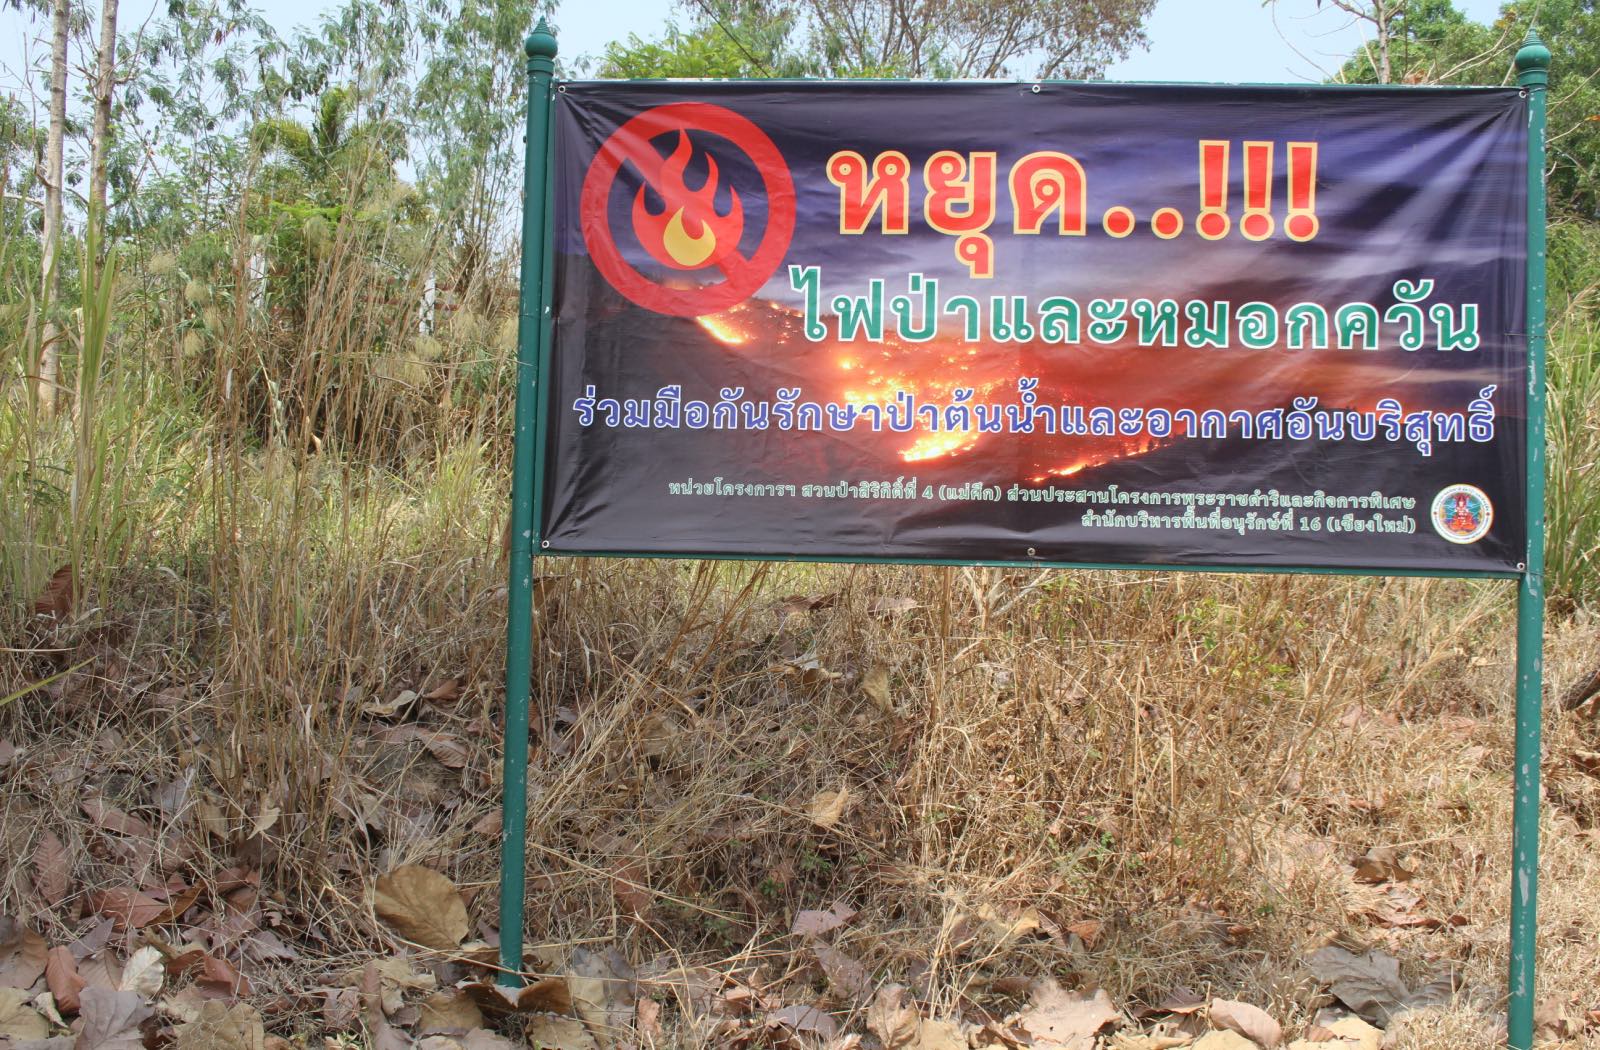 A banner on the side of the road shows a fire symbol with a line through it, with writing in Thai